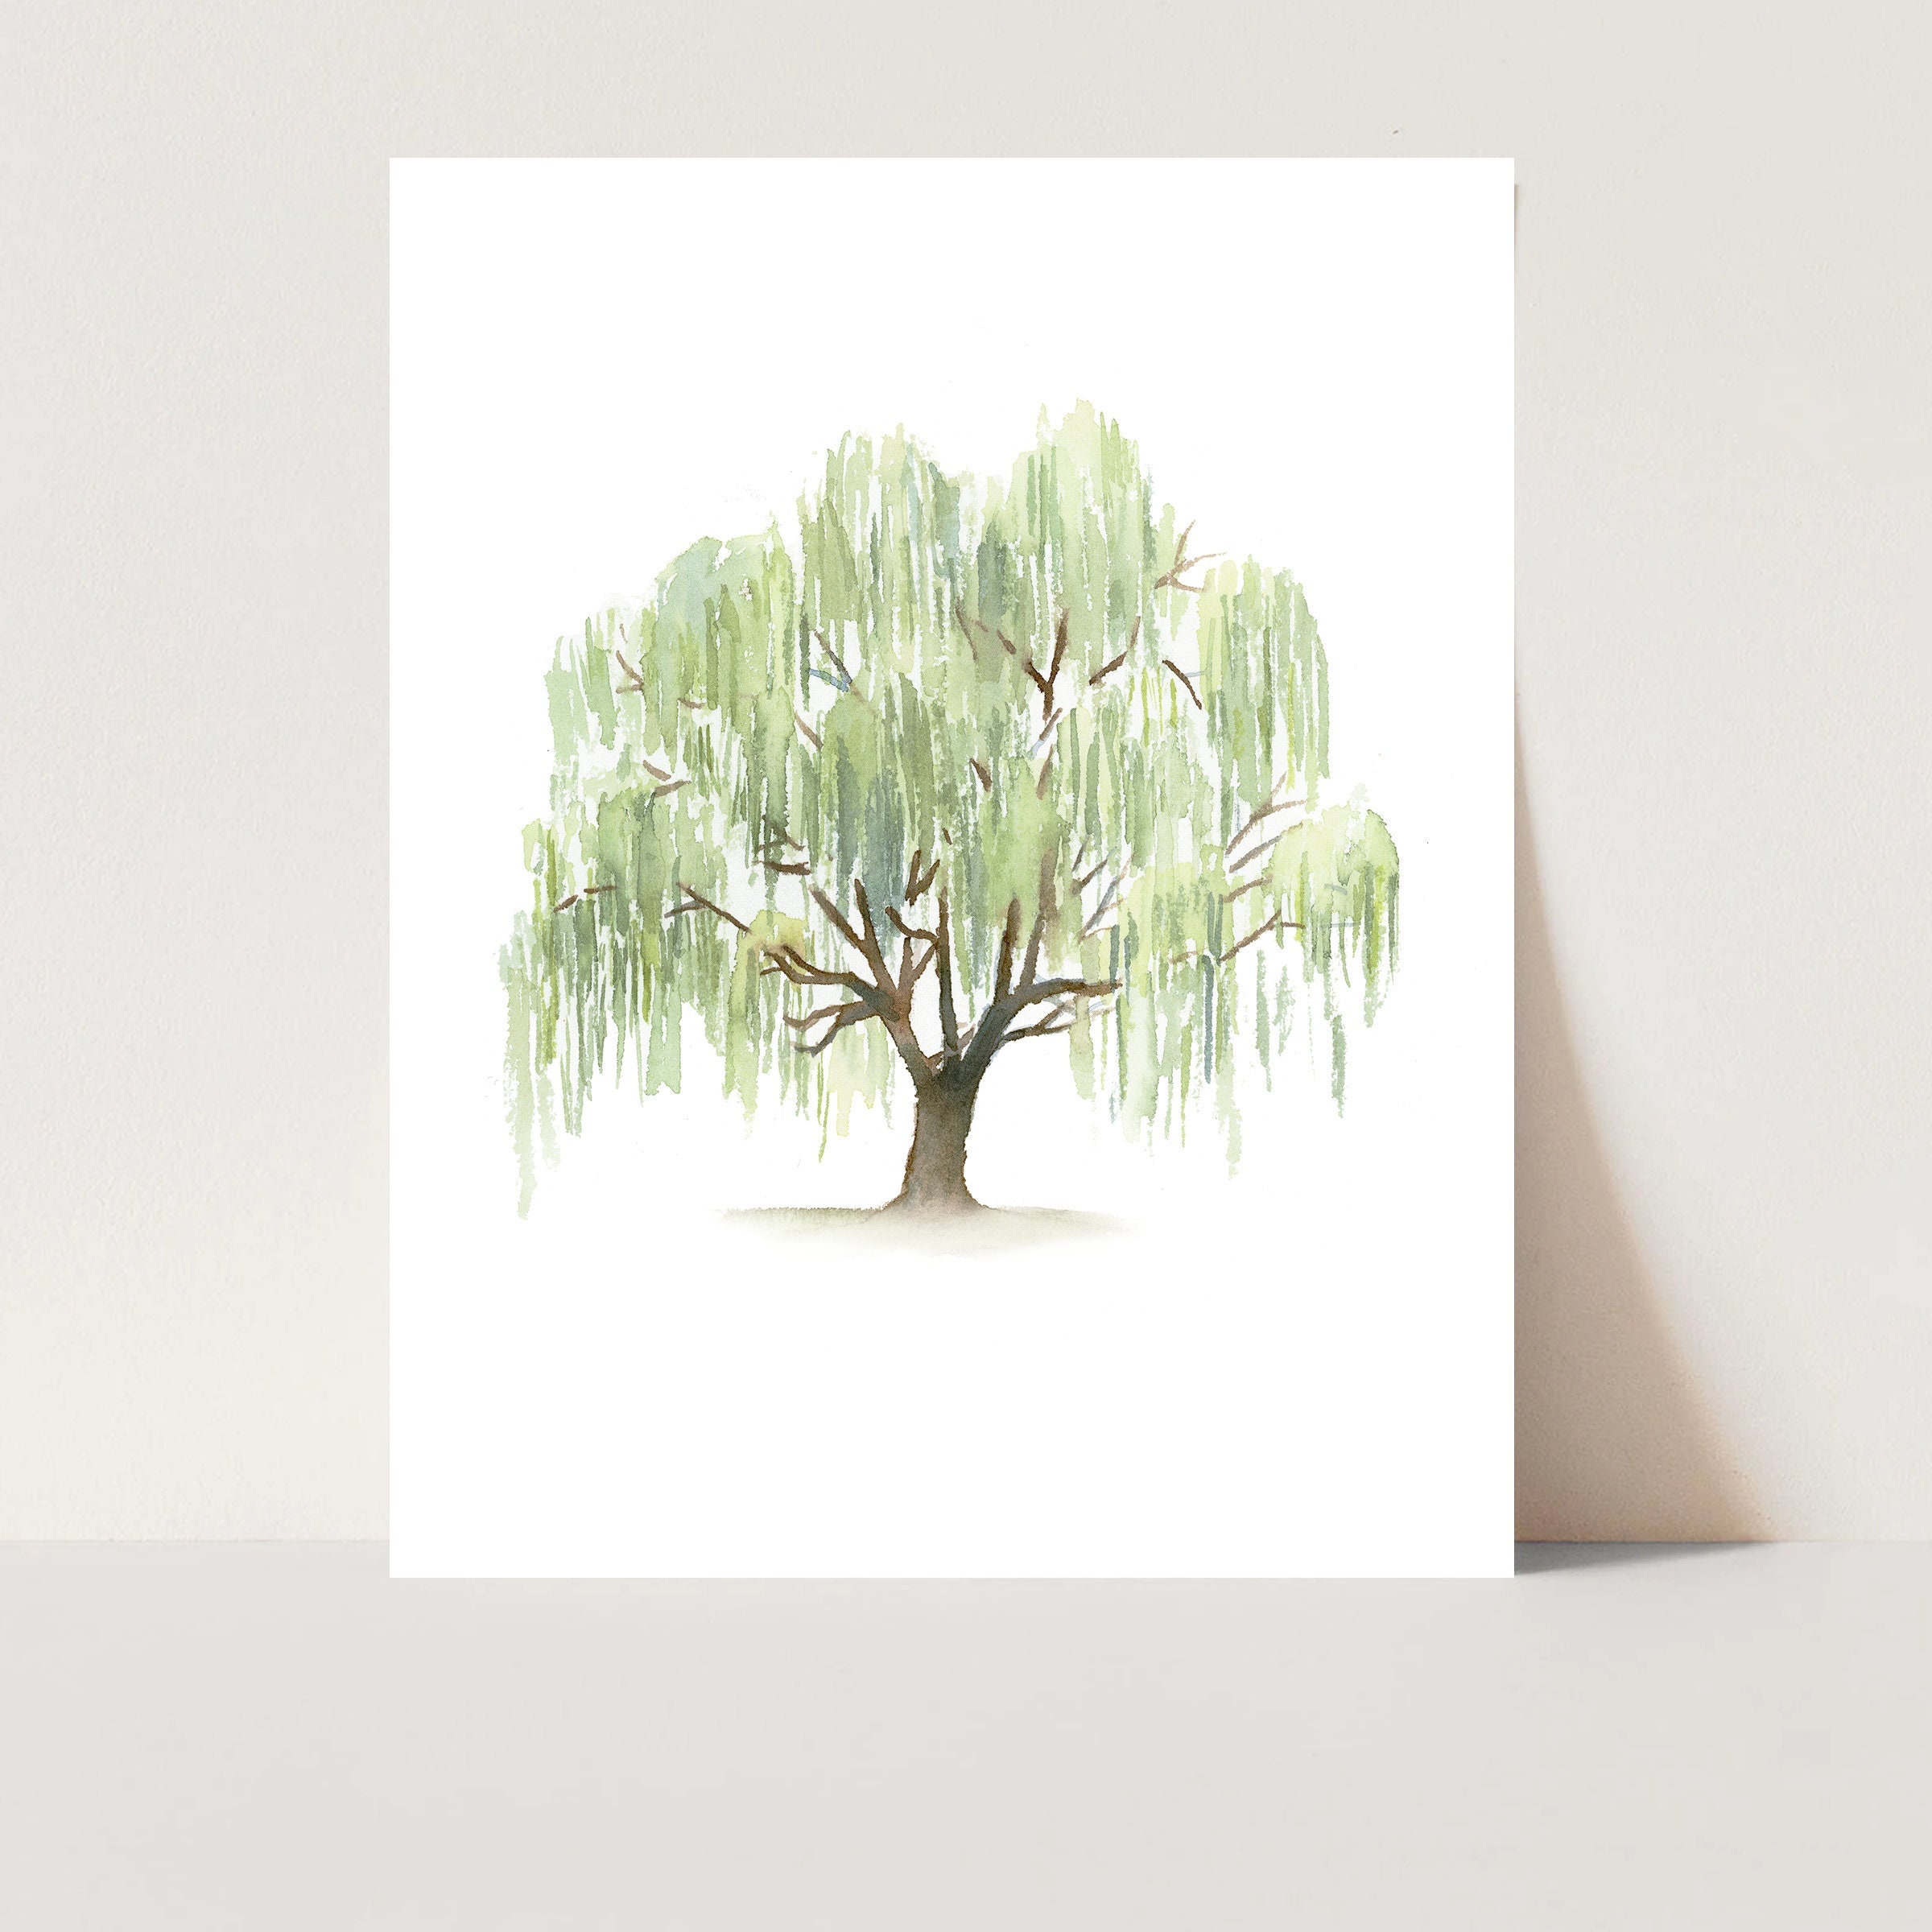 Buy Willow Tree Watercolor Art Print of a Weeping Willow Tree on Online in  India  Etsy